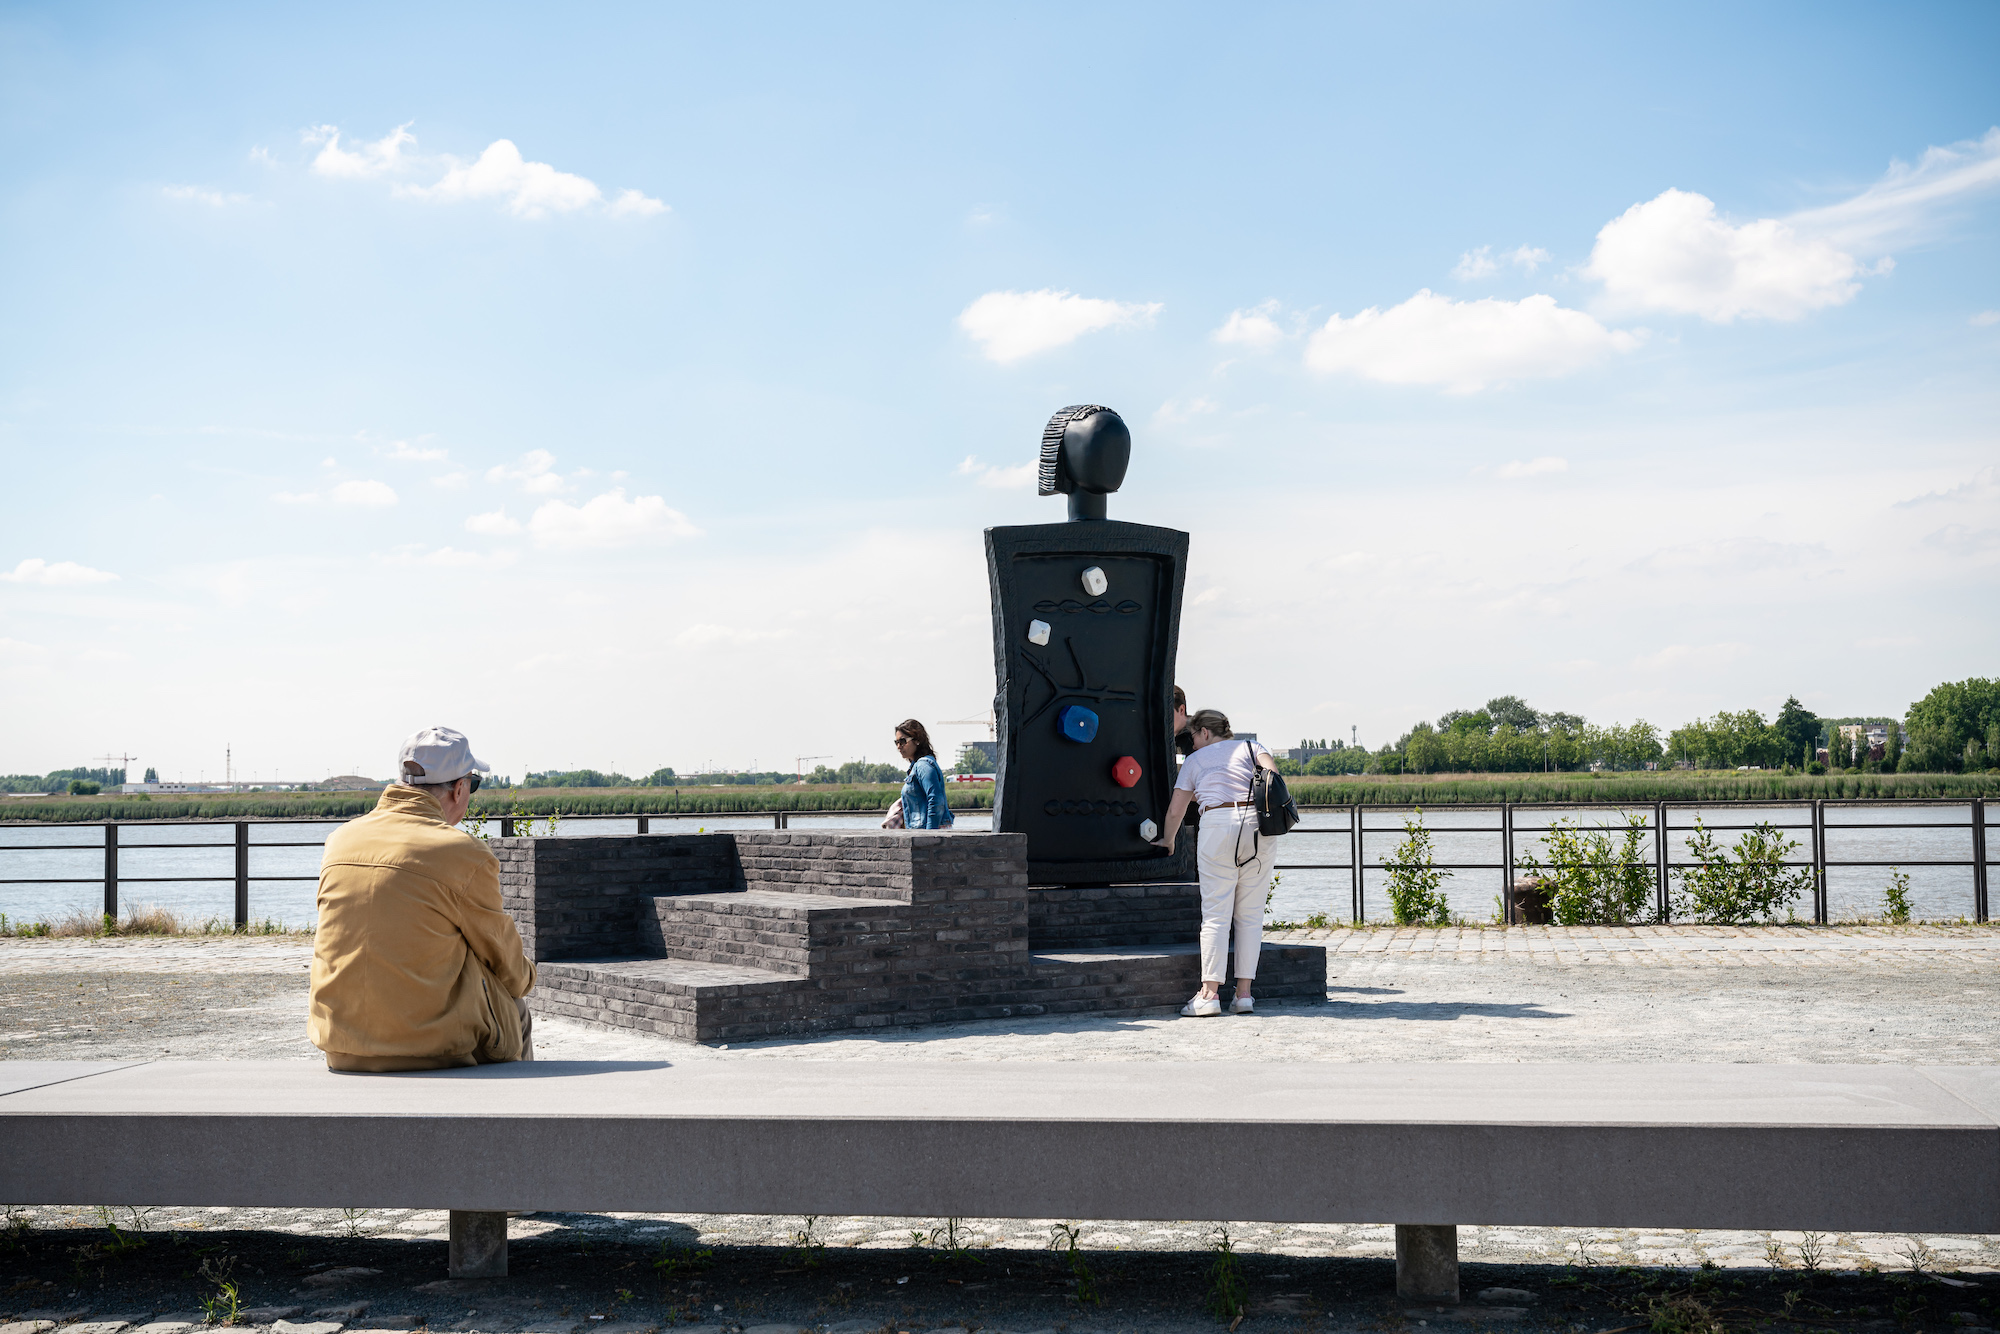 A person on a bench in front of a large figurative / monumnetal sculpture resides next to a river front.